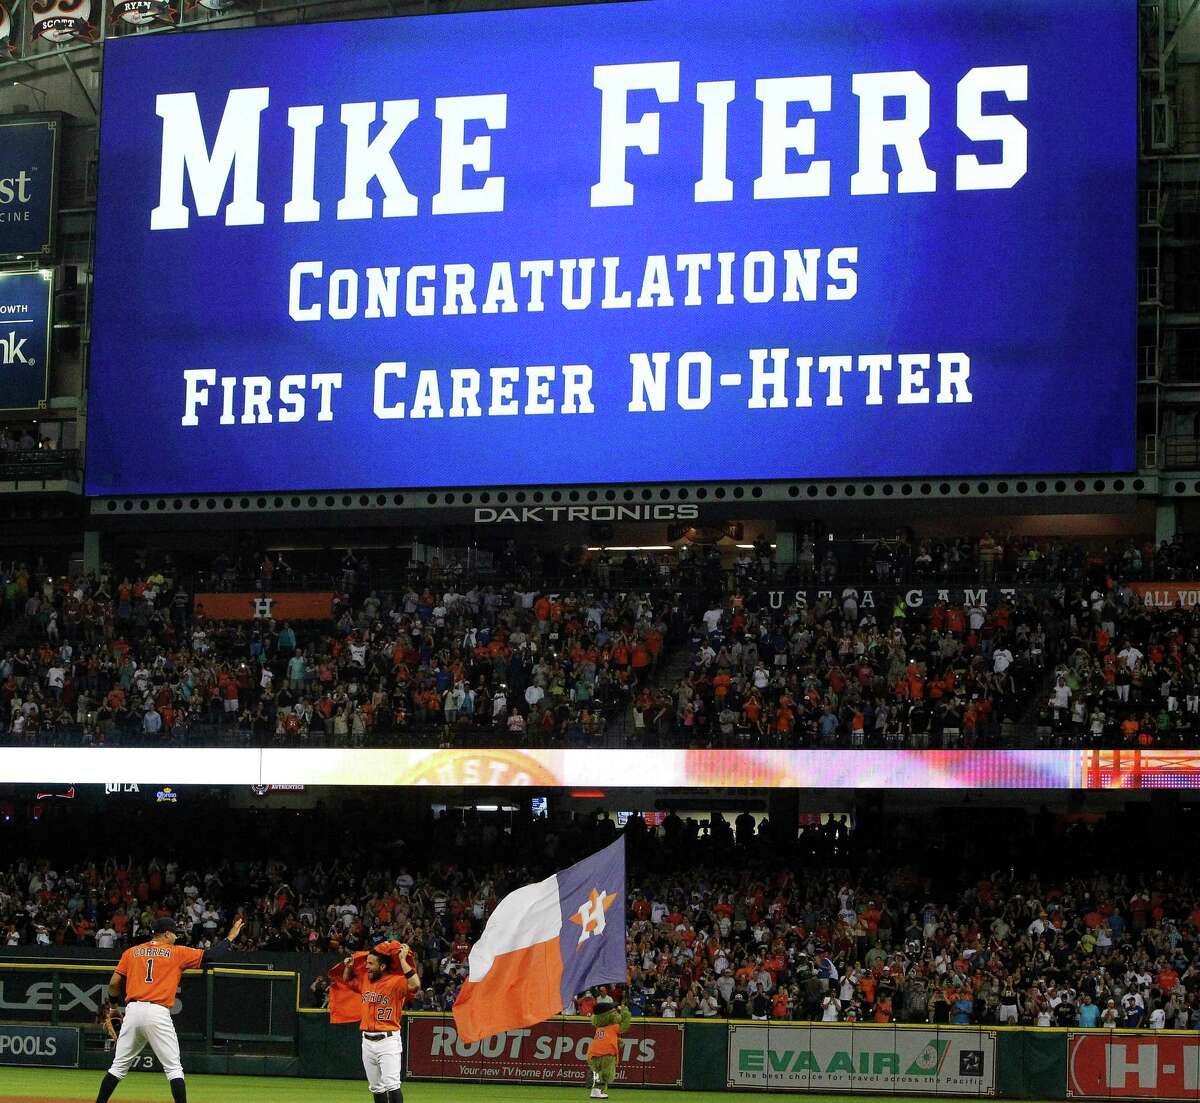 Astros starting pitcher Mike Fiers received a big congratulations Friday night after tossing his first no-hitter and the first at Minute Maid Park in a 3-0 win over the Dodgers.